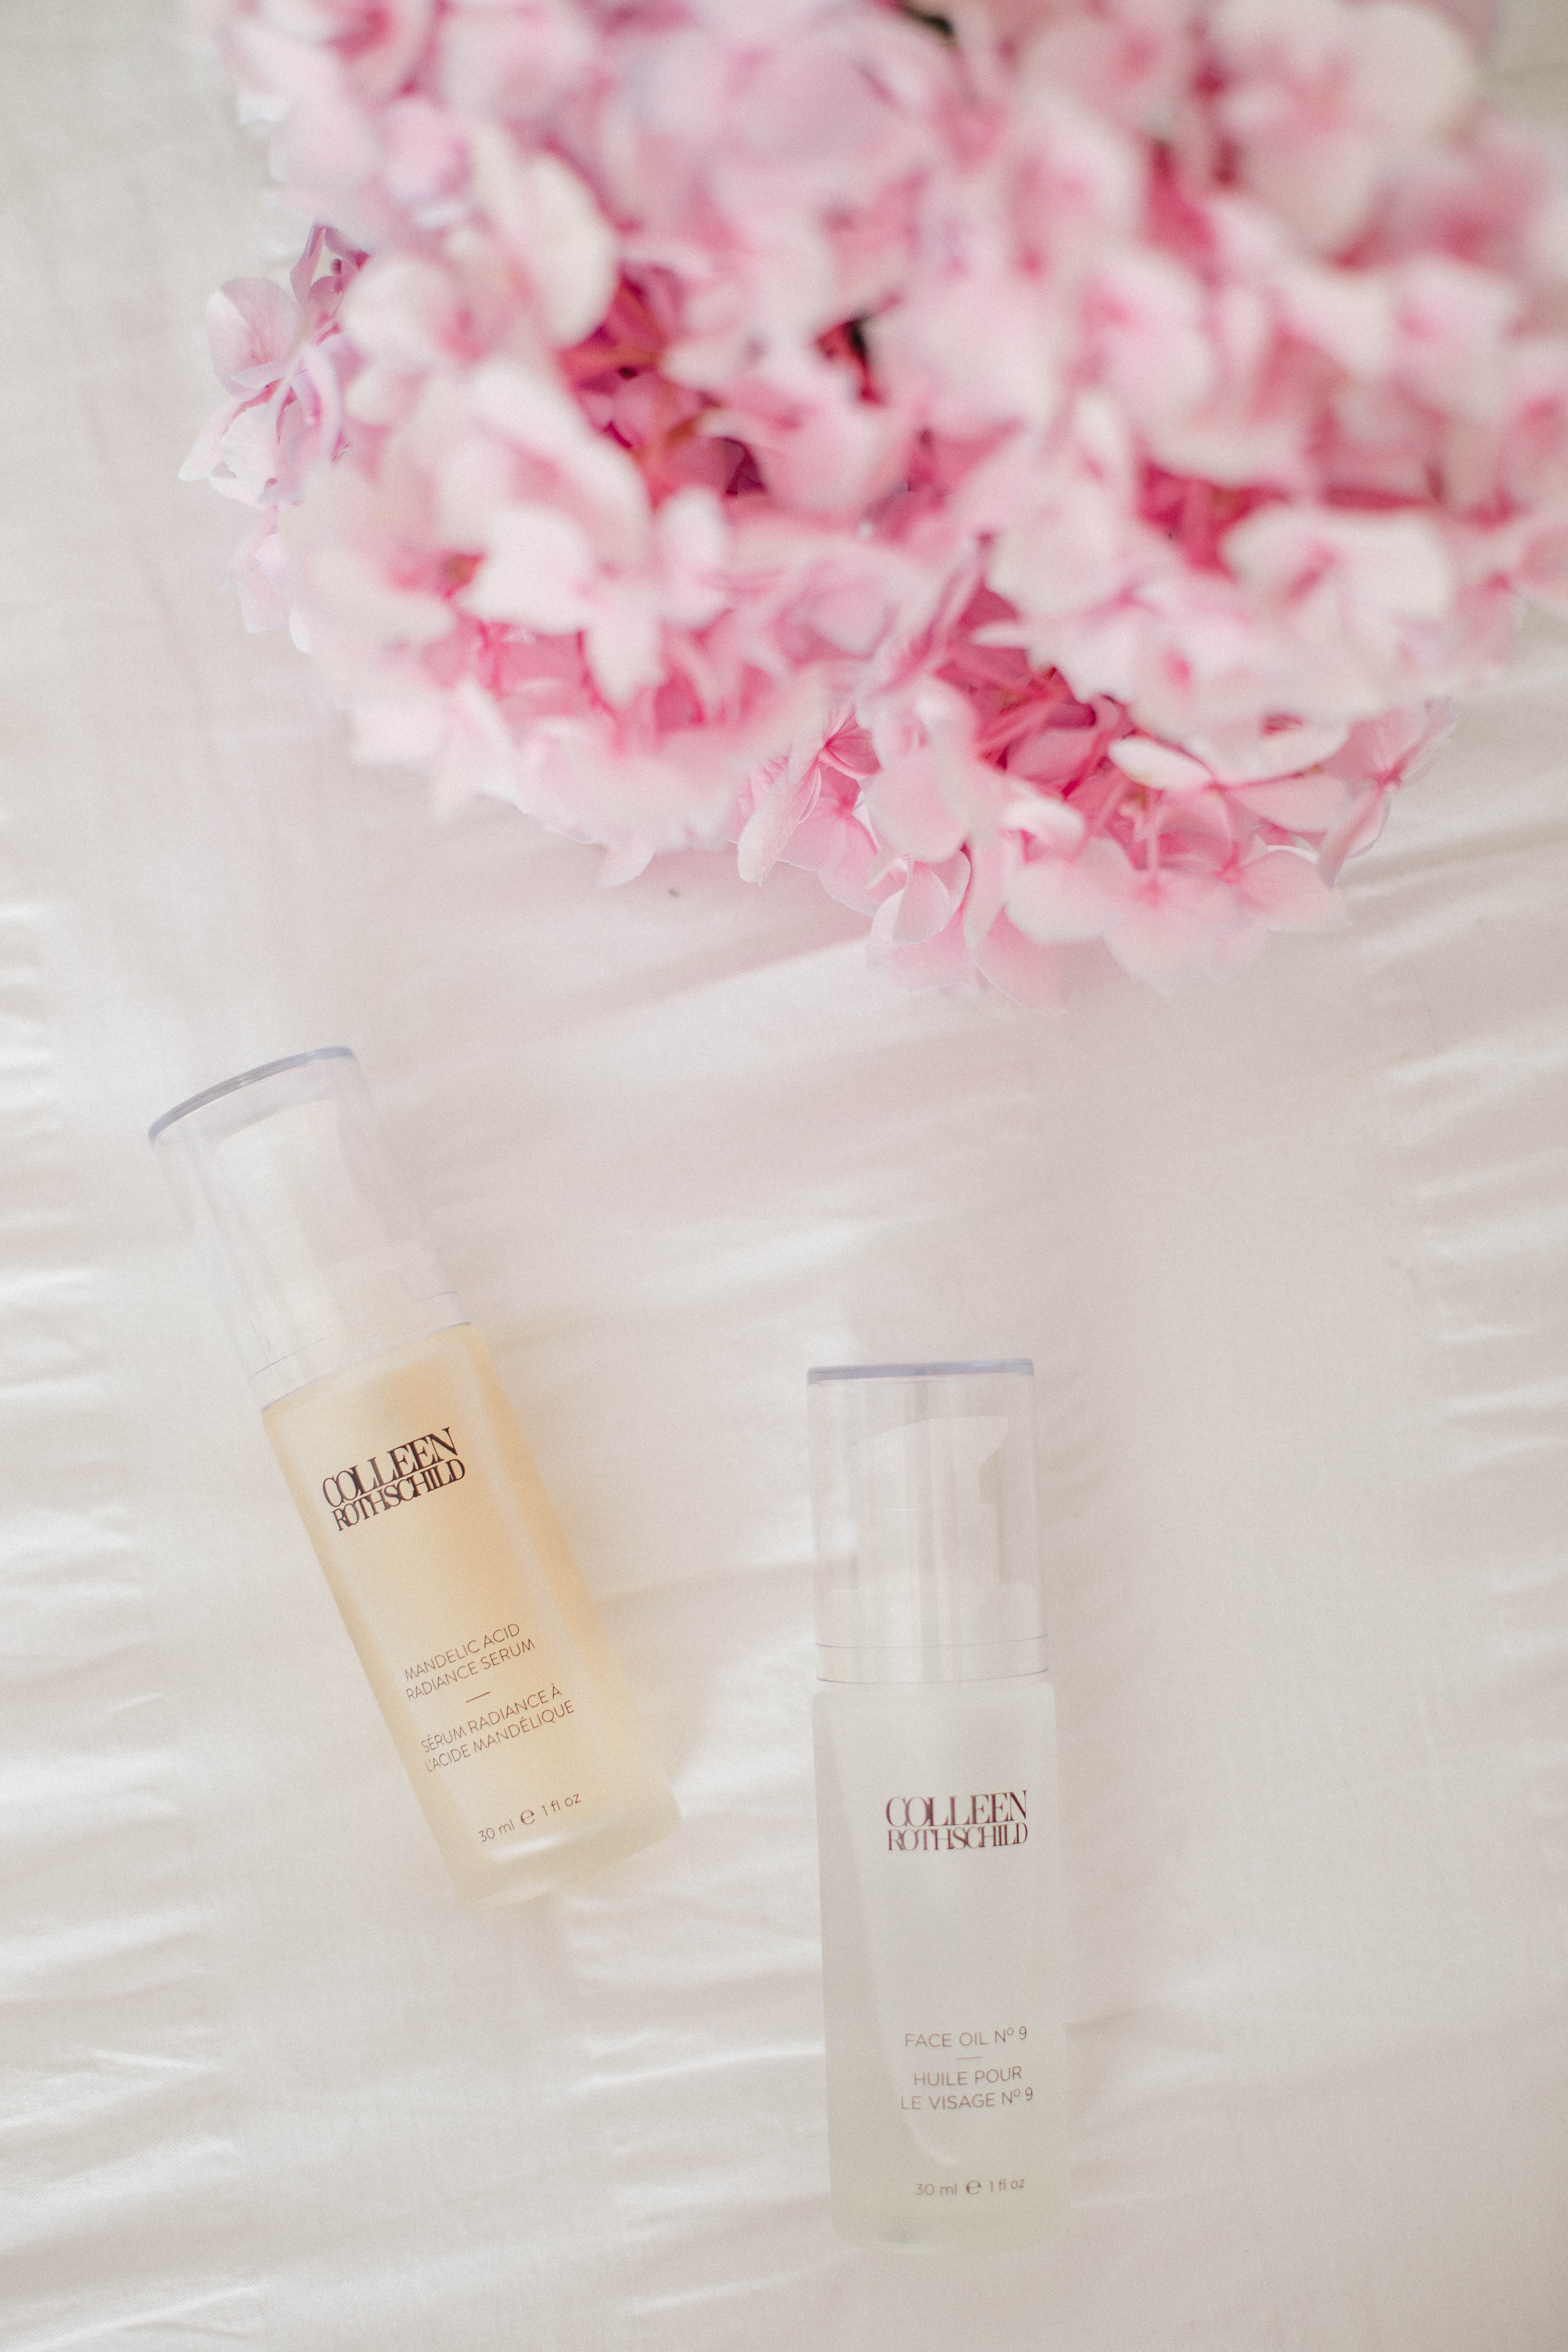 Connecticut life and style blogger Lauren McBride shares her favorite Colleen Rothschild skincare products, as well as a coupon code for her 4th of July sale.